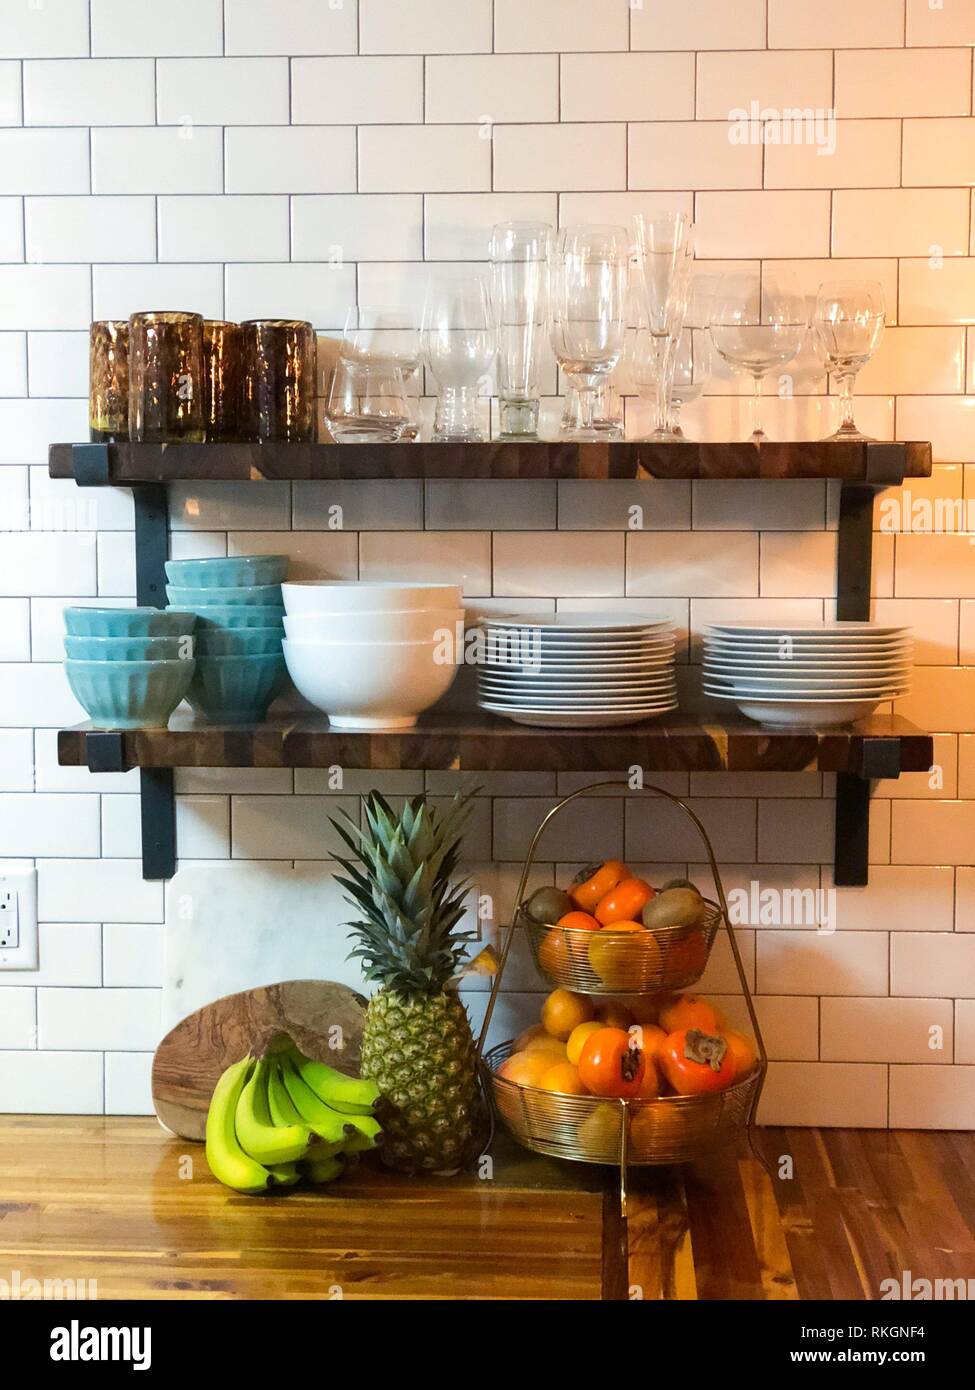 Open butcher block shelving against a tile backsplash wall in the kitchen of a luxury house remodel and renovation. Stock Photo